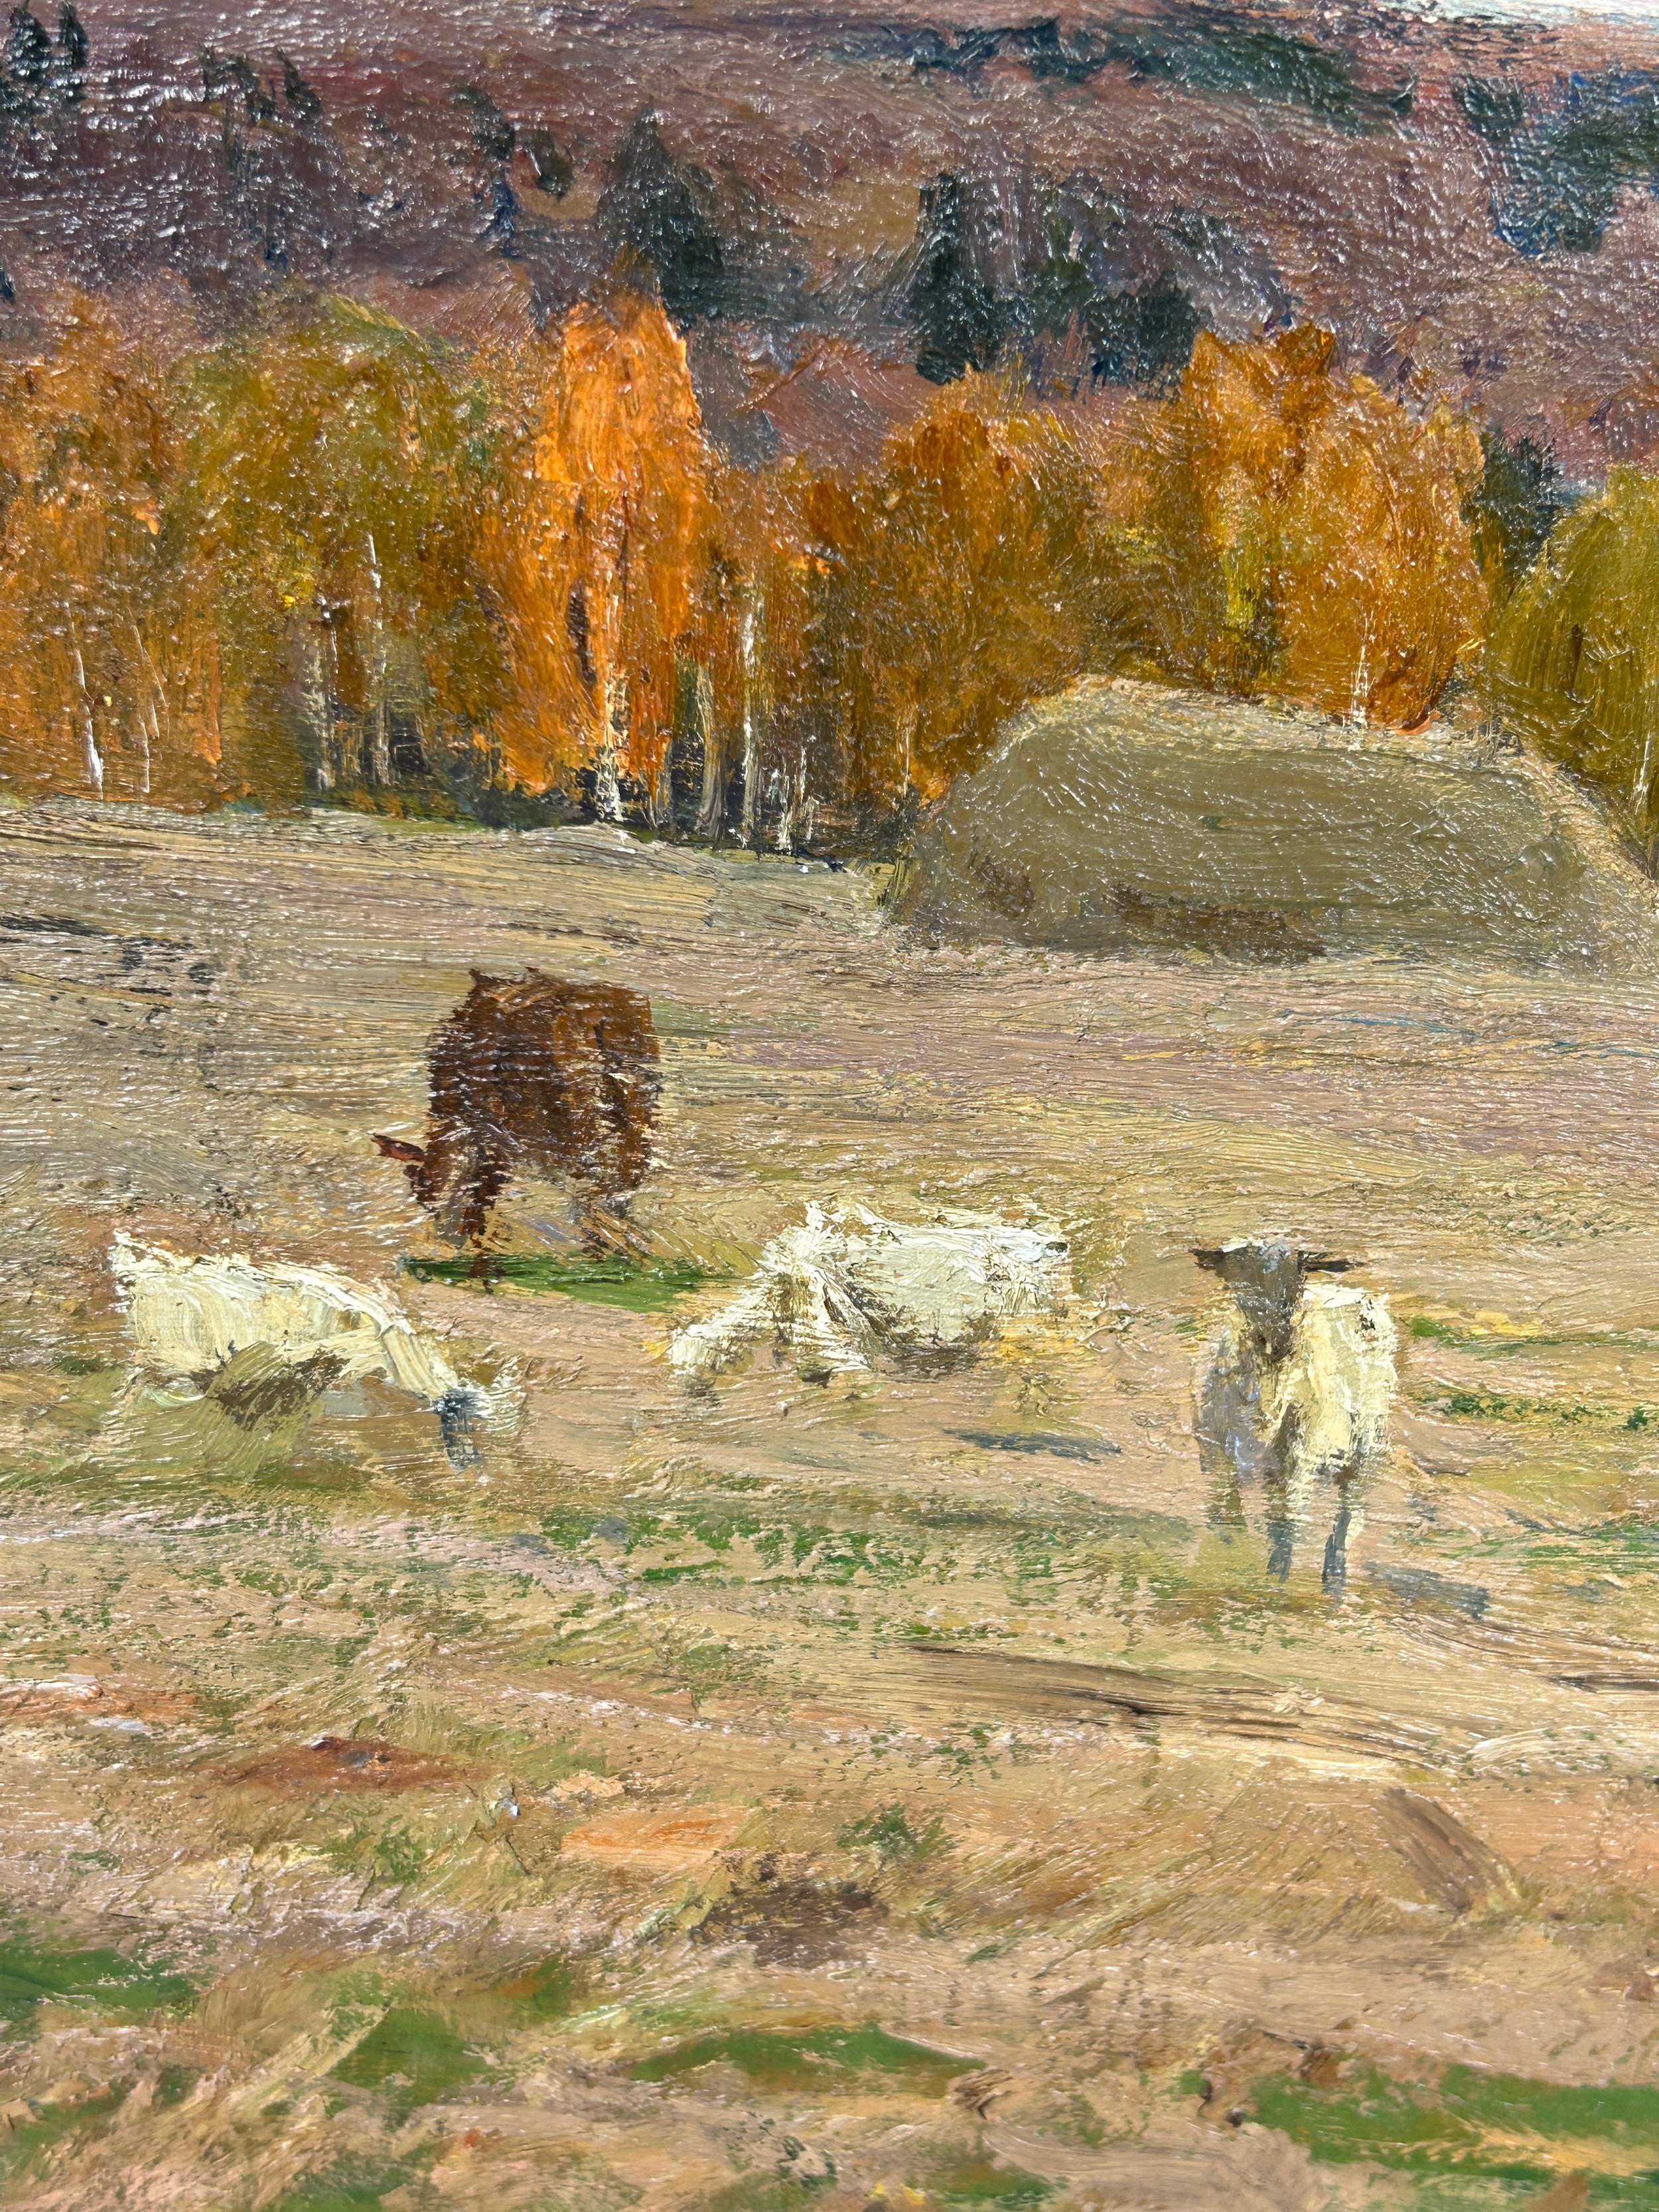 ALEKSEI MIKHAILOVICH GRITSAI (1914-1998): AN OIL ON BOARD PAINTING DEPICTING CATTLE IN A FIELD - Image 5 of 8